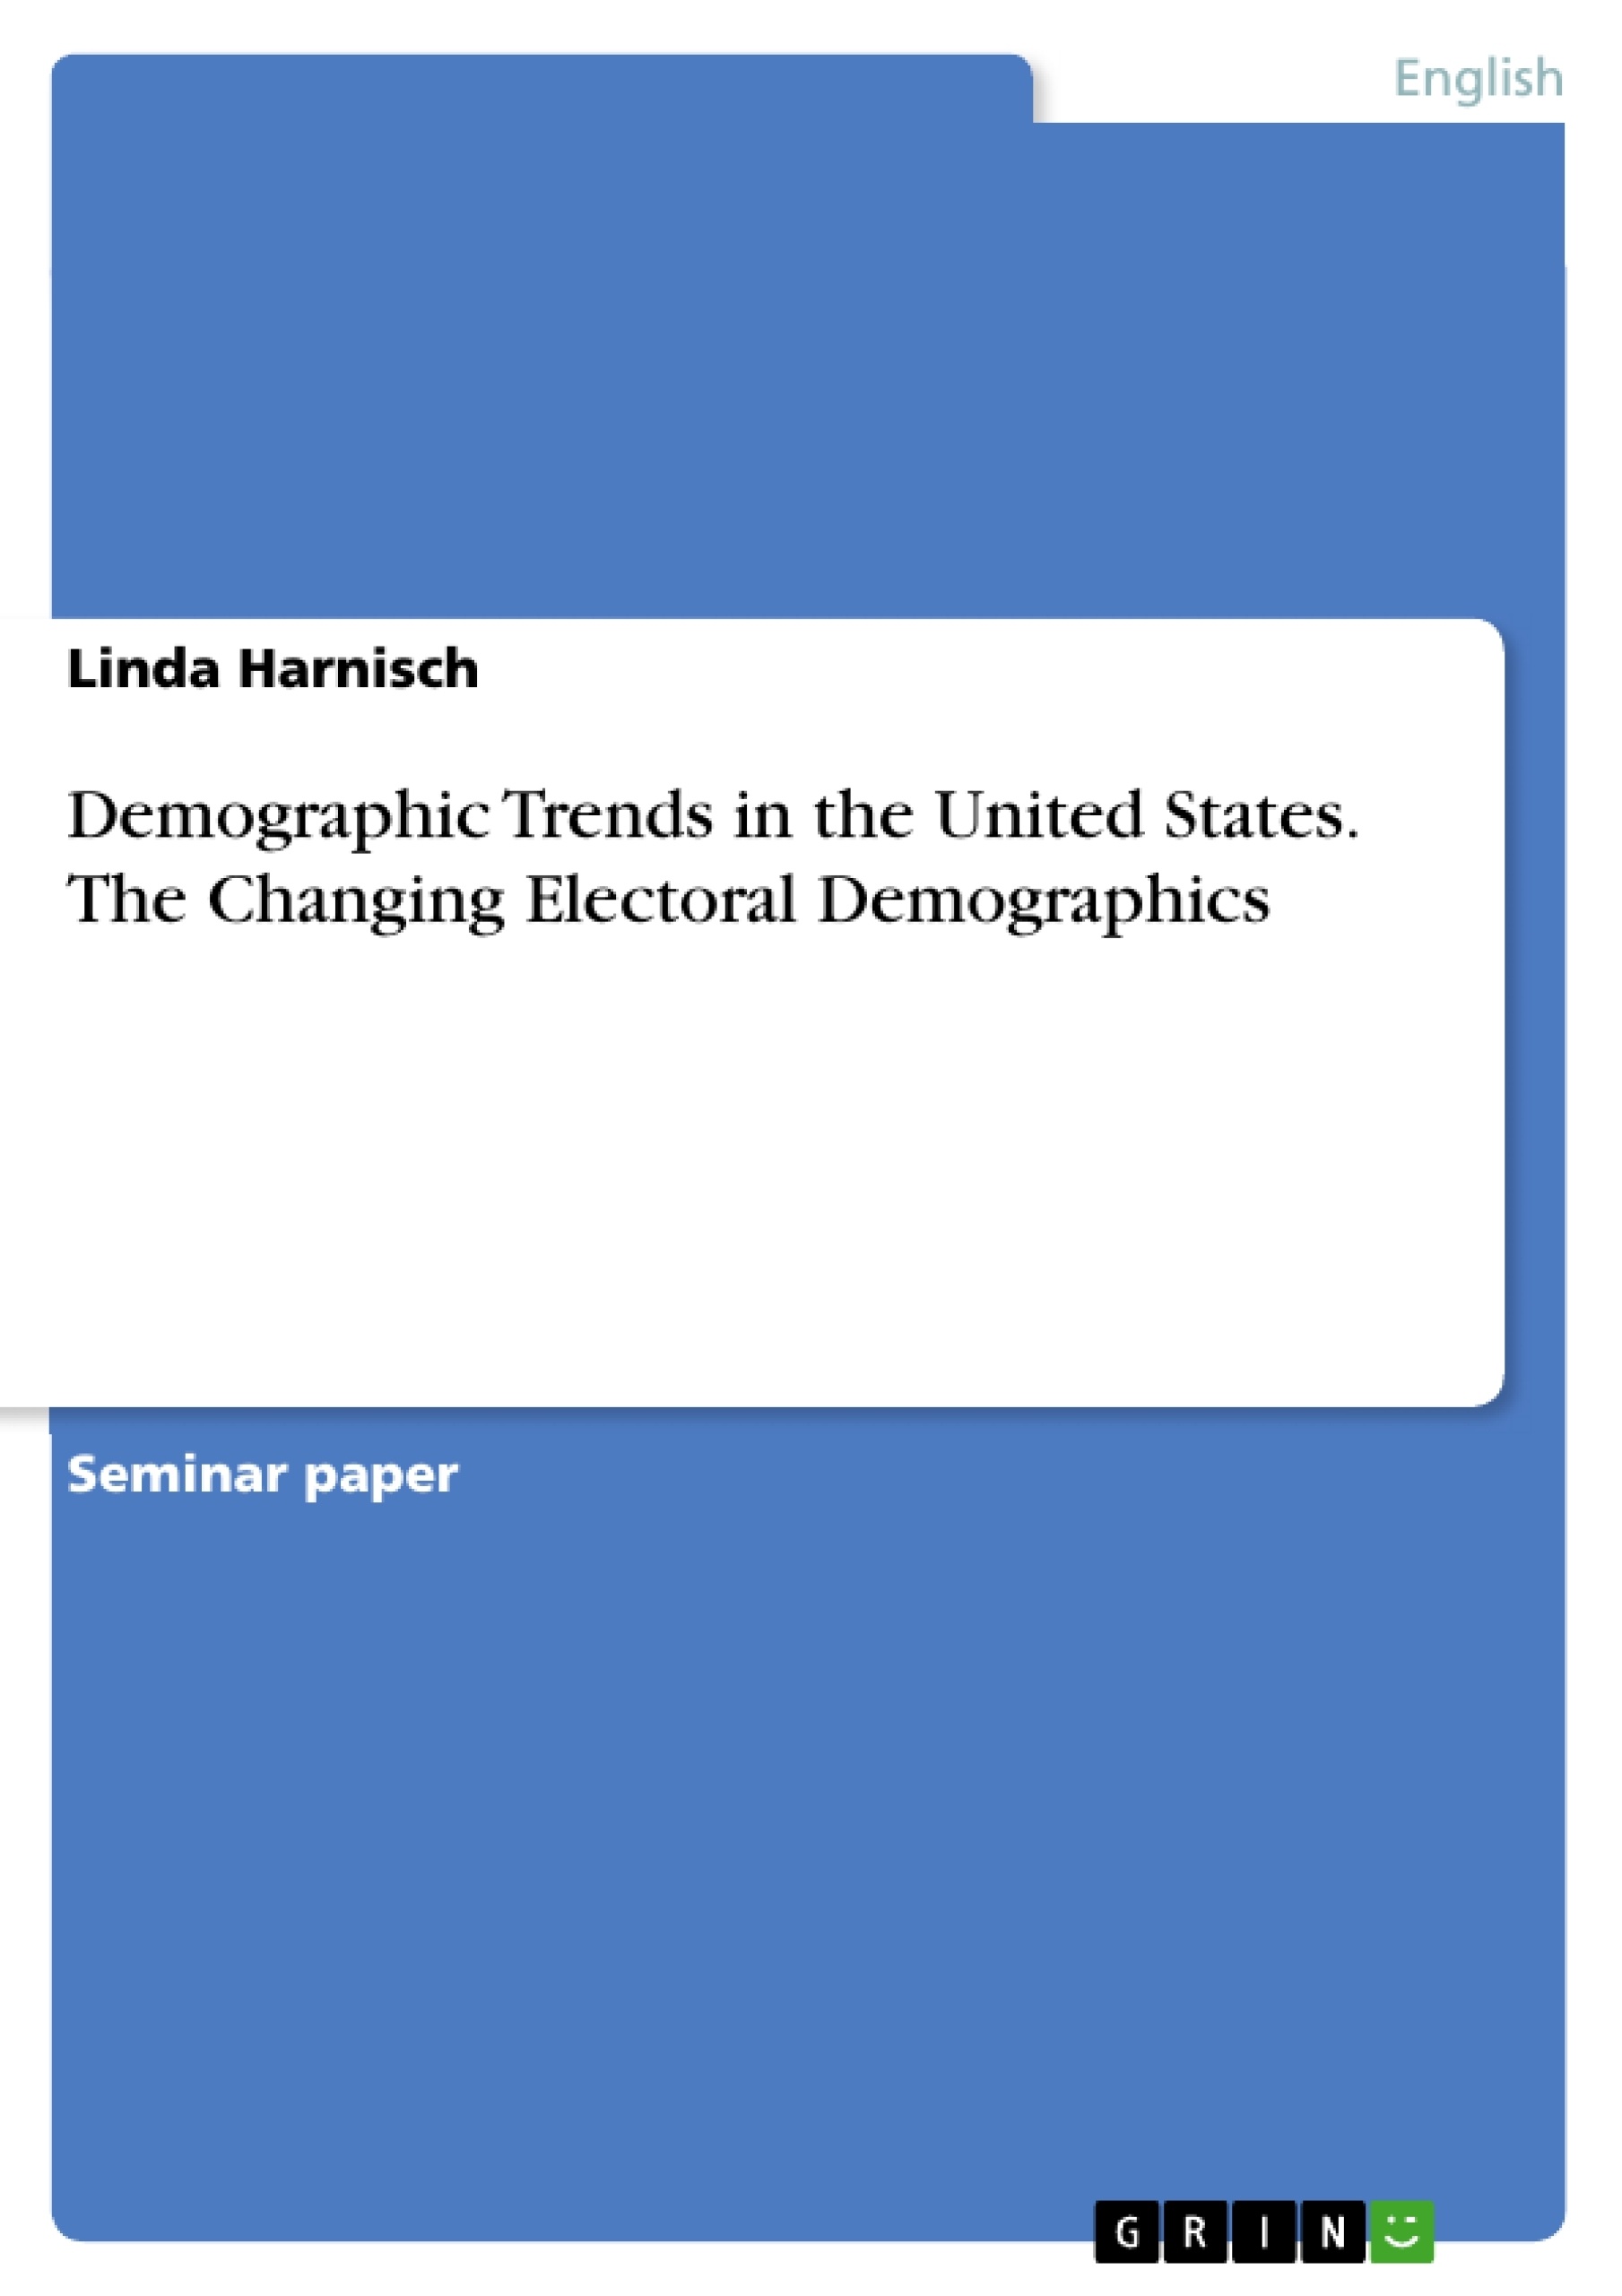 Title: Demographic Trends in the United States. The Changing Electoral Demographics